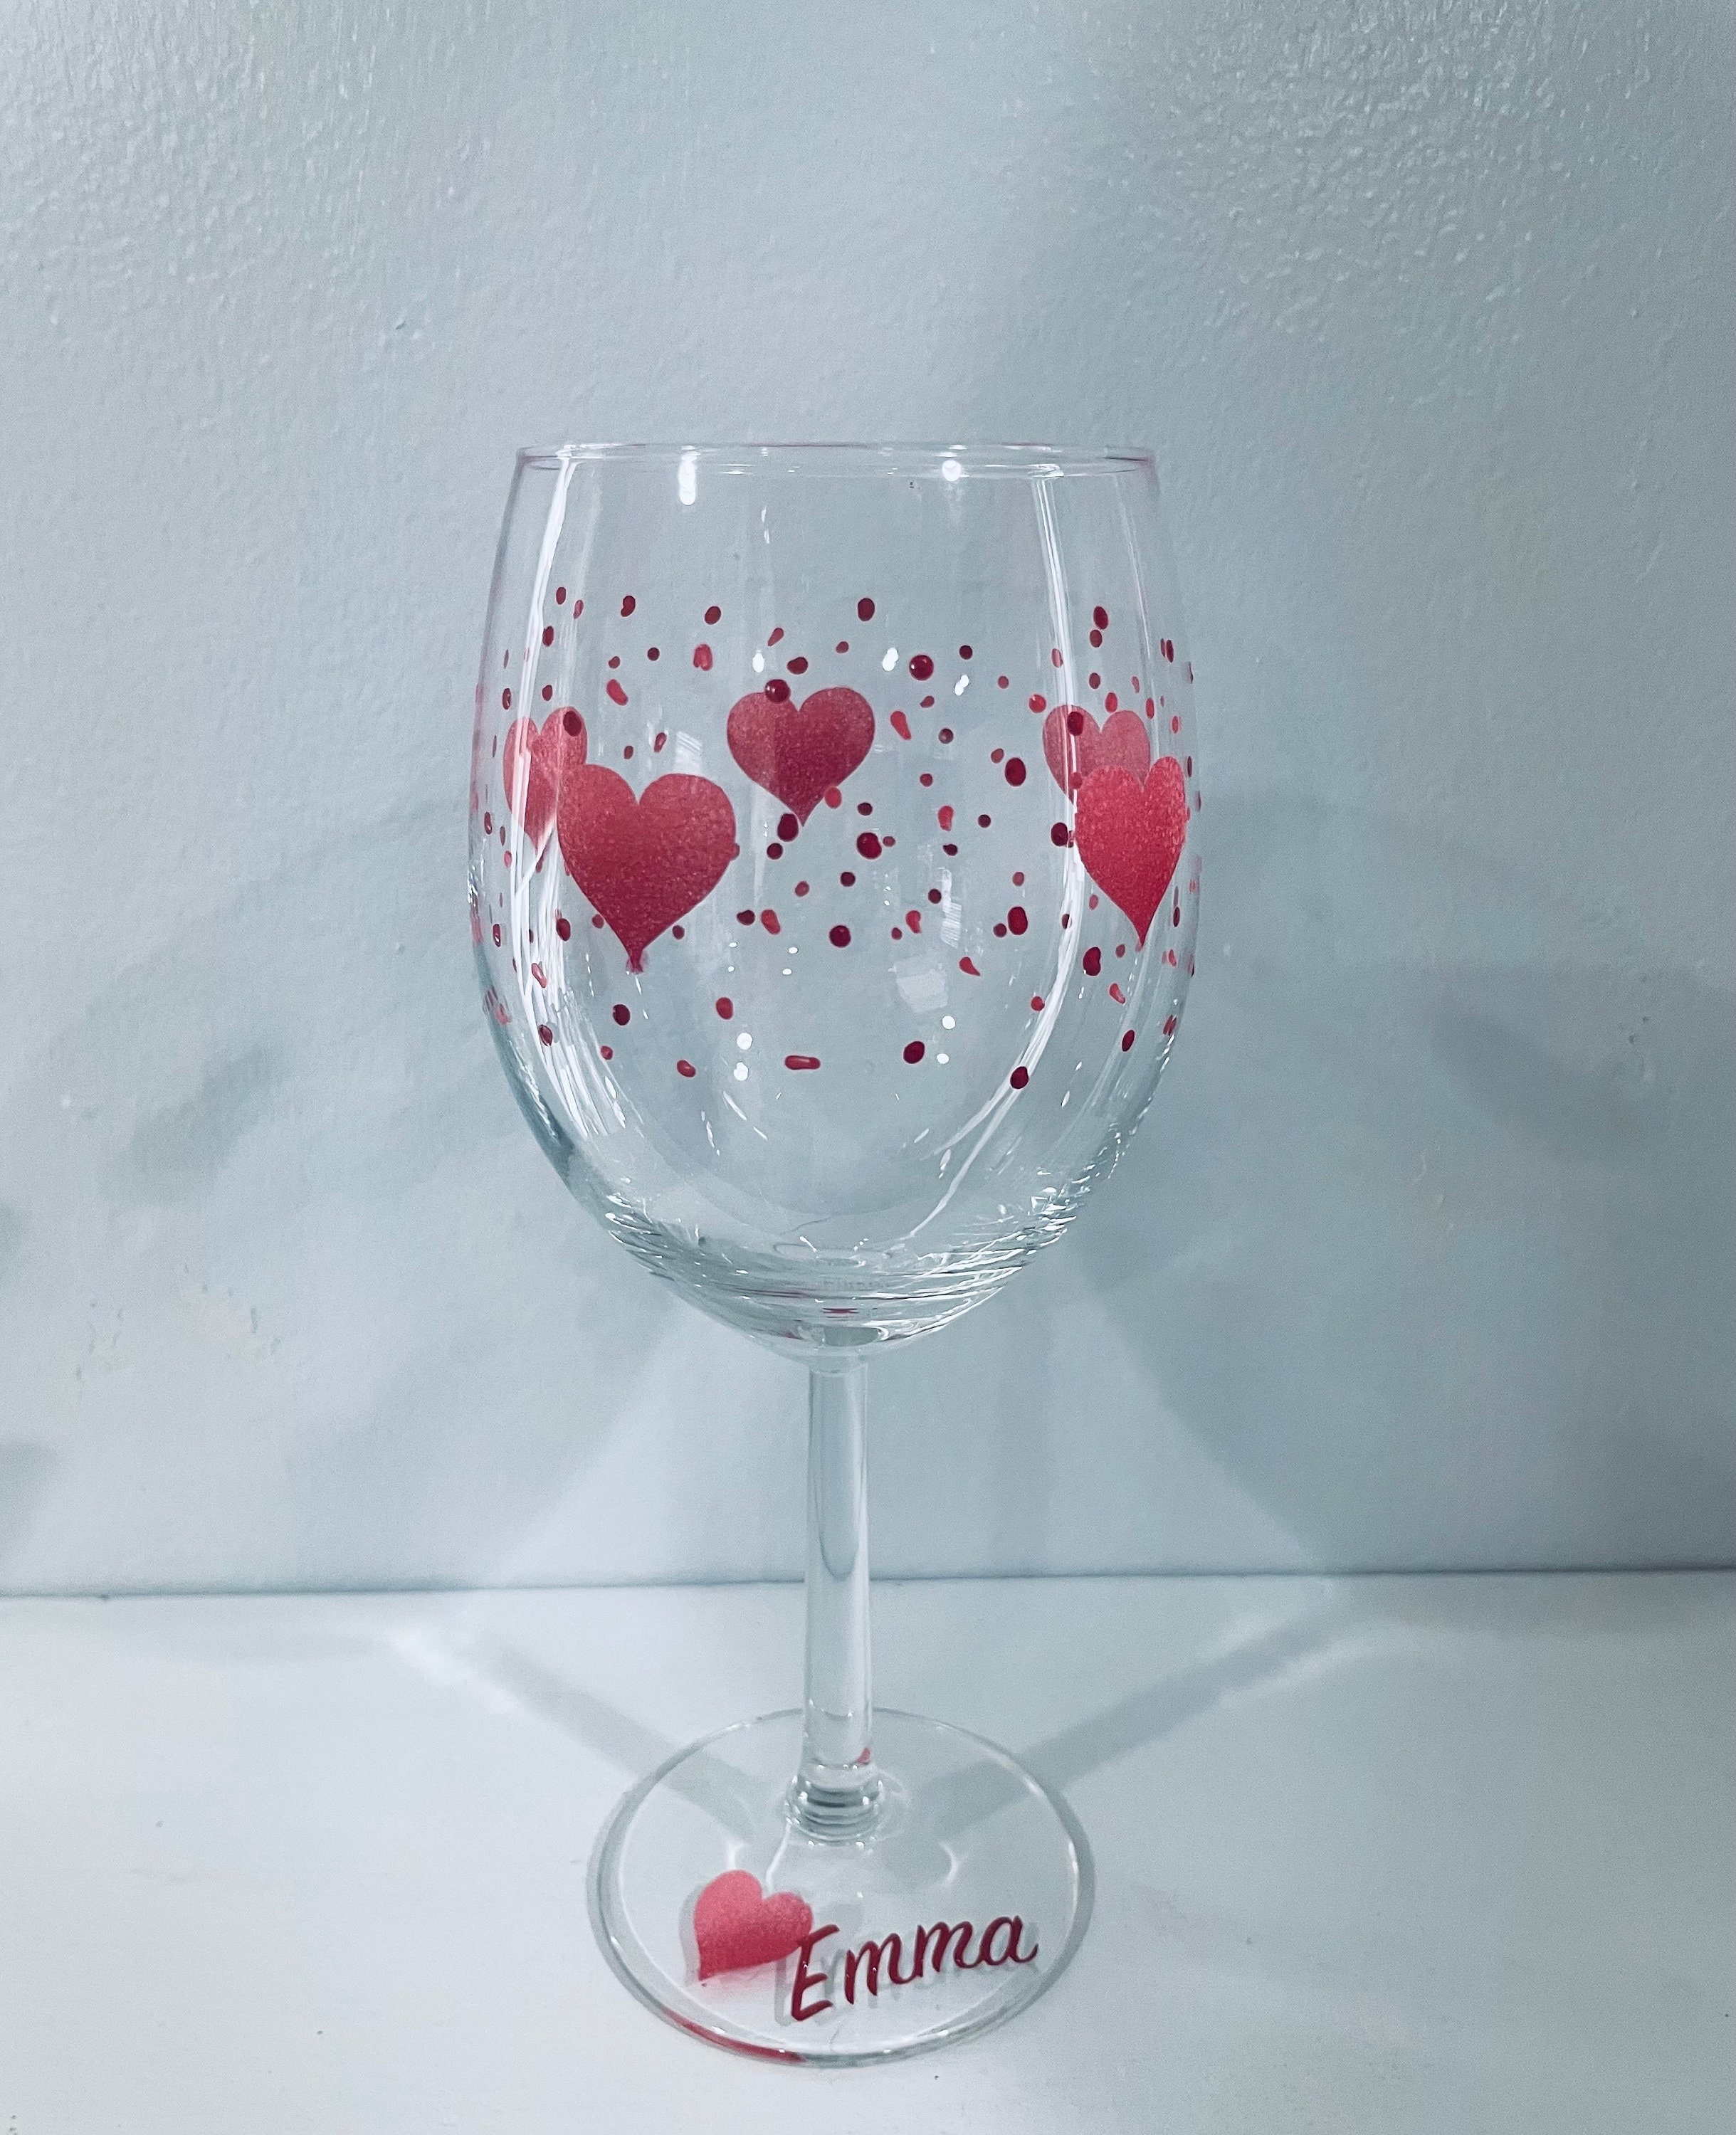 Cathedral, Colorful Hand-painted Wine Glass, Single Stem, 4 Styles